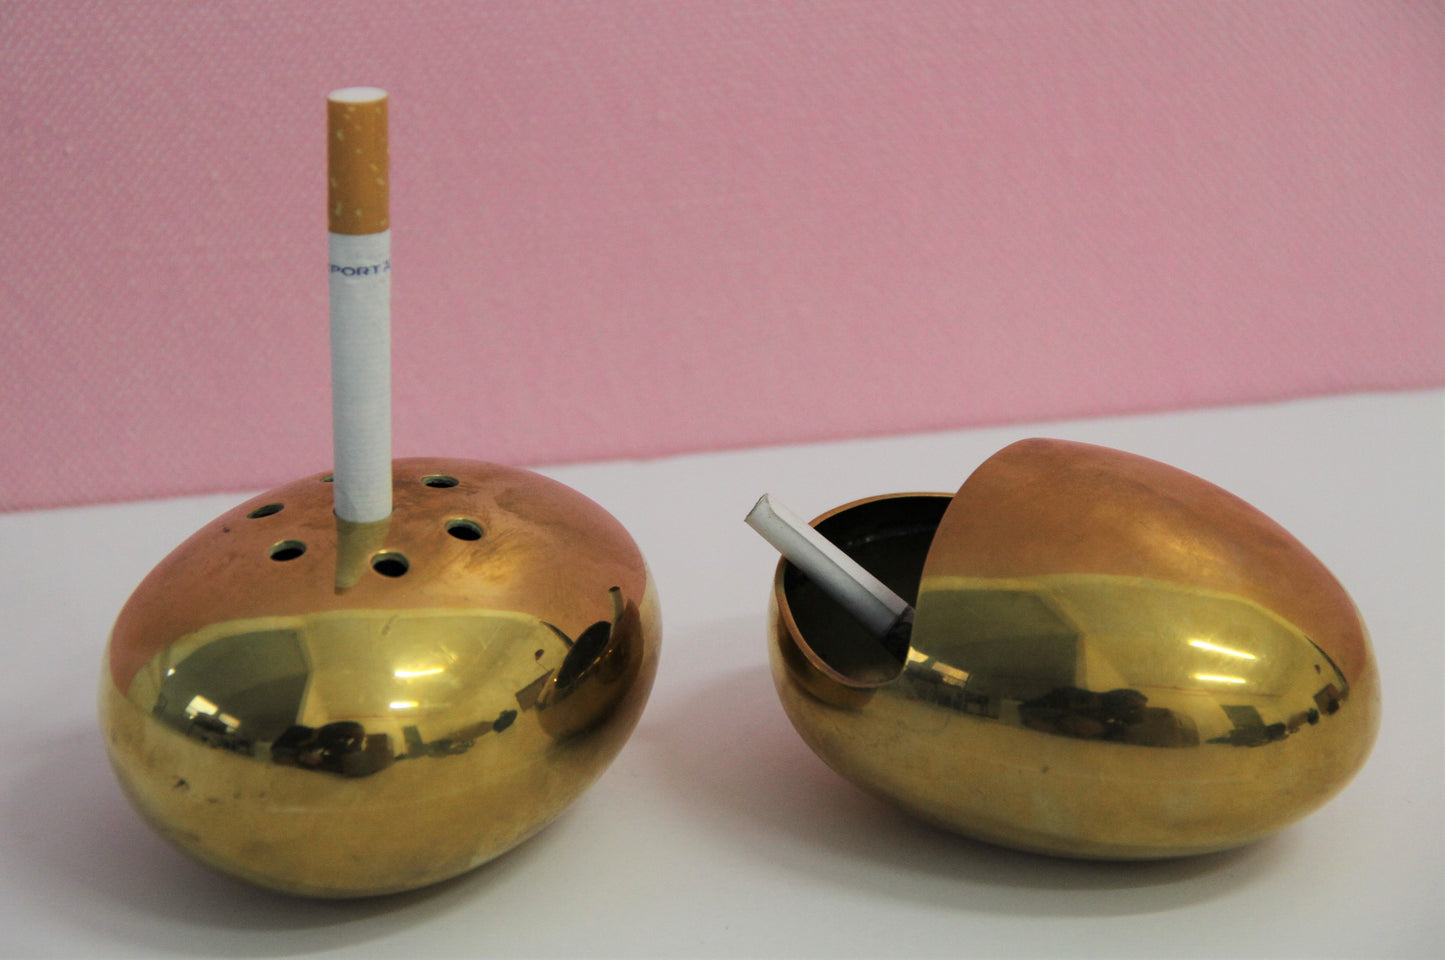 Cohr Brass Ashtray Set "The Smile" - 1950s SOLD OUT! I have a steel one available...